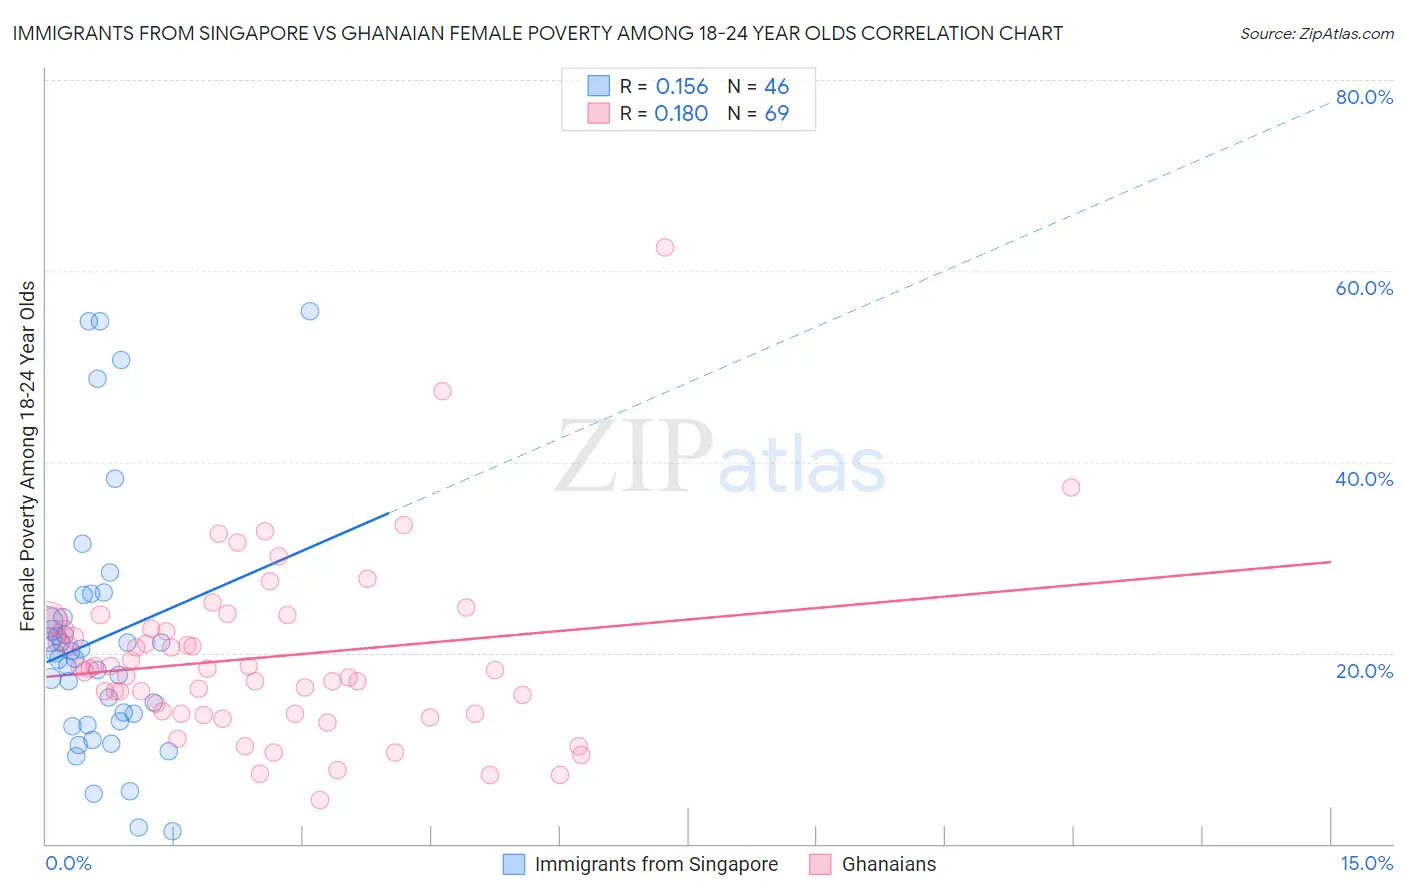 Immigrants from Singapore vs Ghanaian Female Poverty Among 18-24 Year Olds